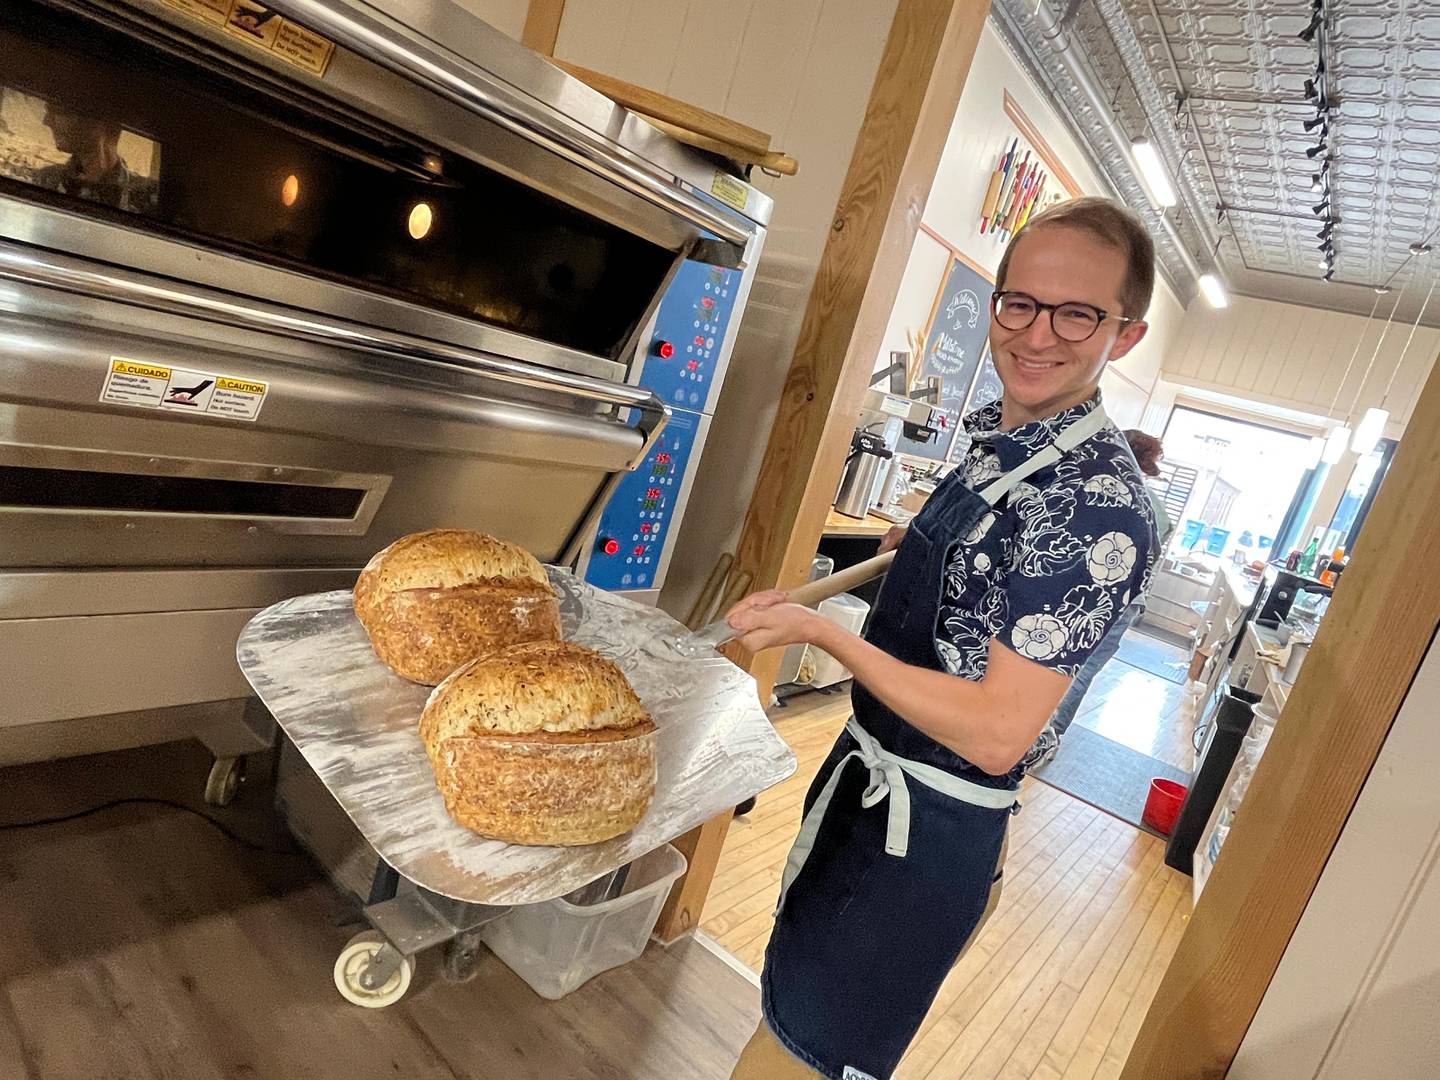 Co-owner Kent Maze displays examples of the artisan breads created at Millstone Bakery in La Salle, singled out for recognition by Illinois Made.